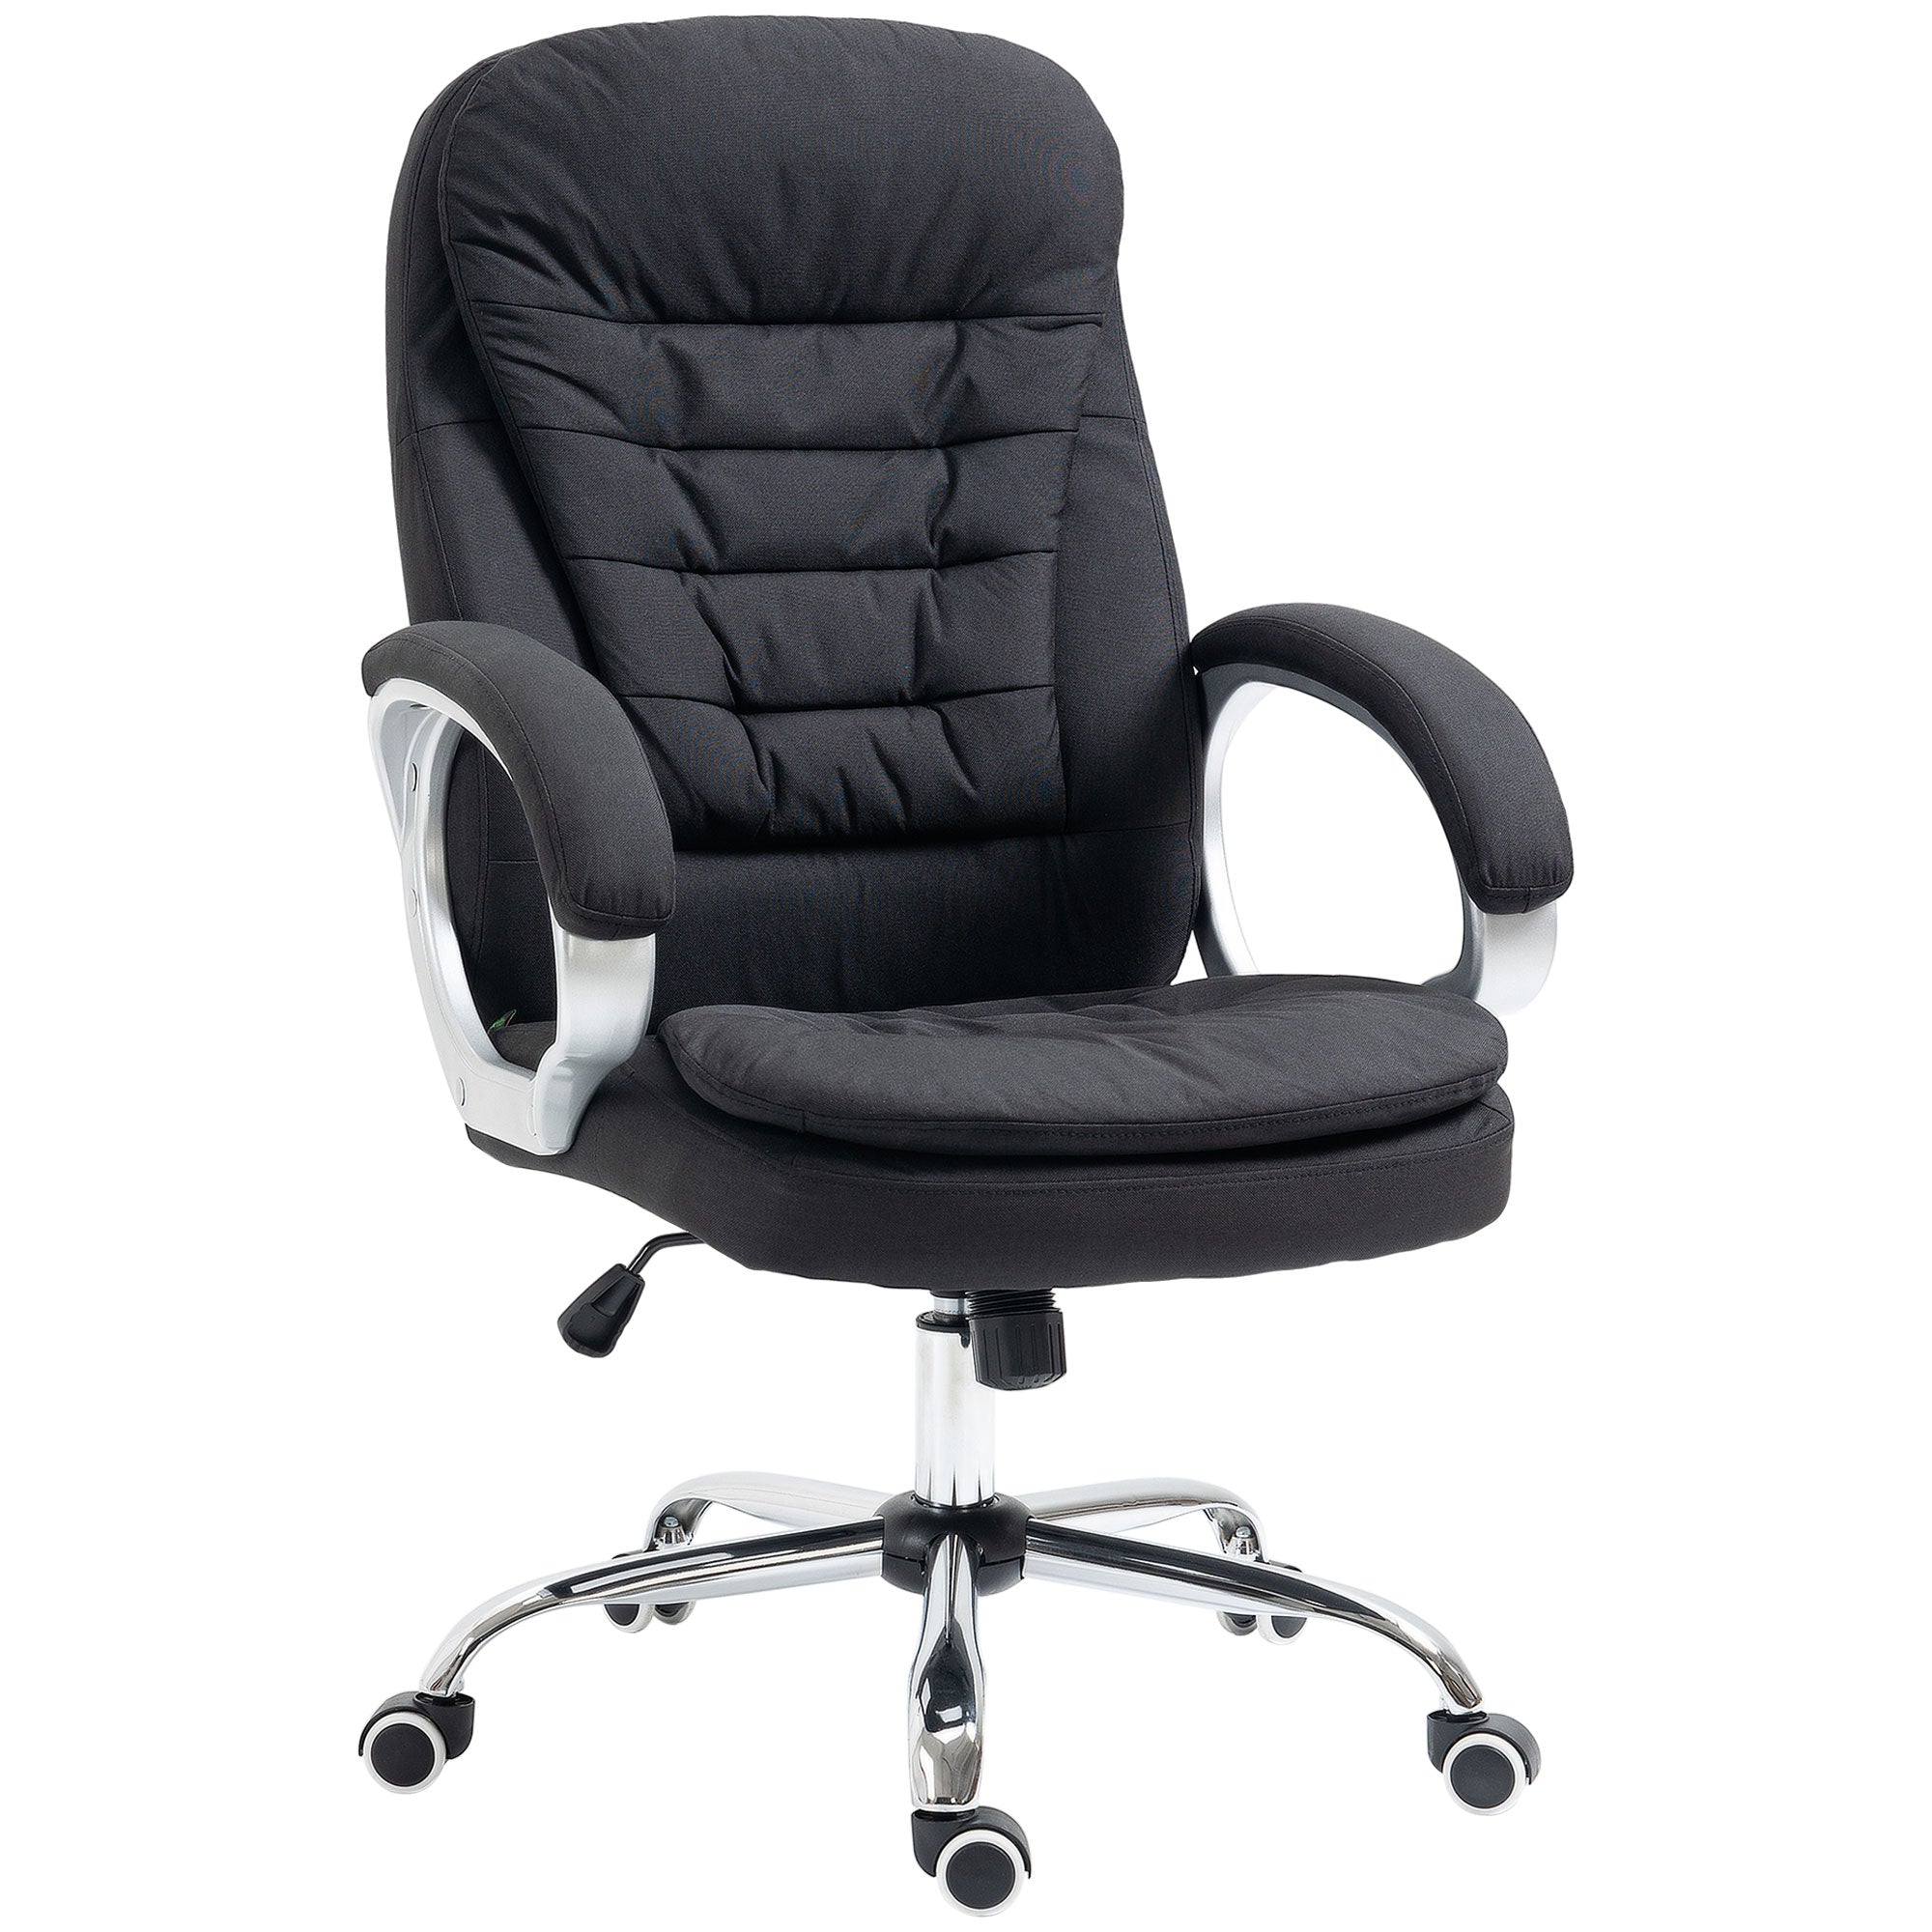 Vinsetto Executive Office Chair with Adjustable Height Swivel Wheels - Black  | TJ Hughes